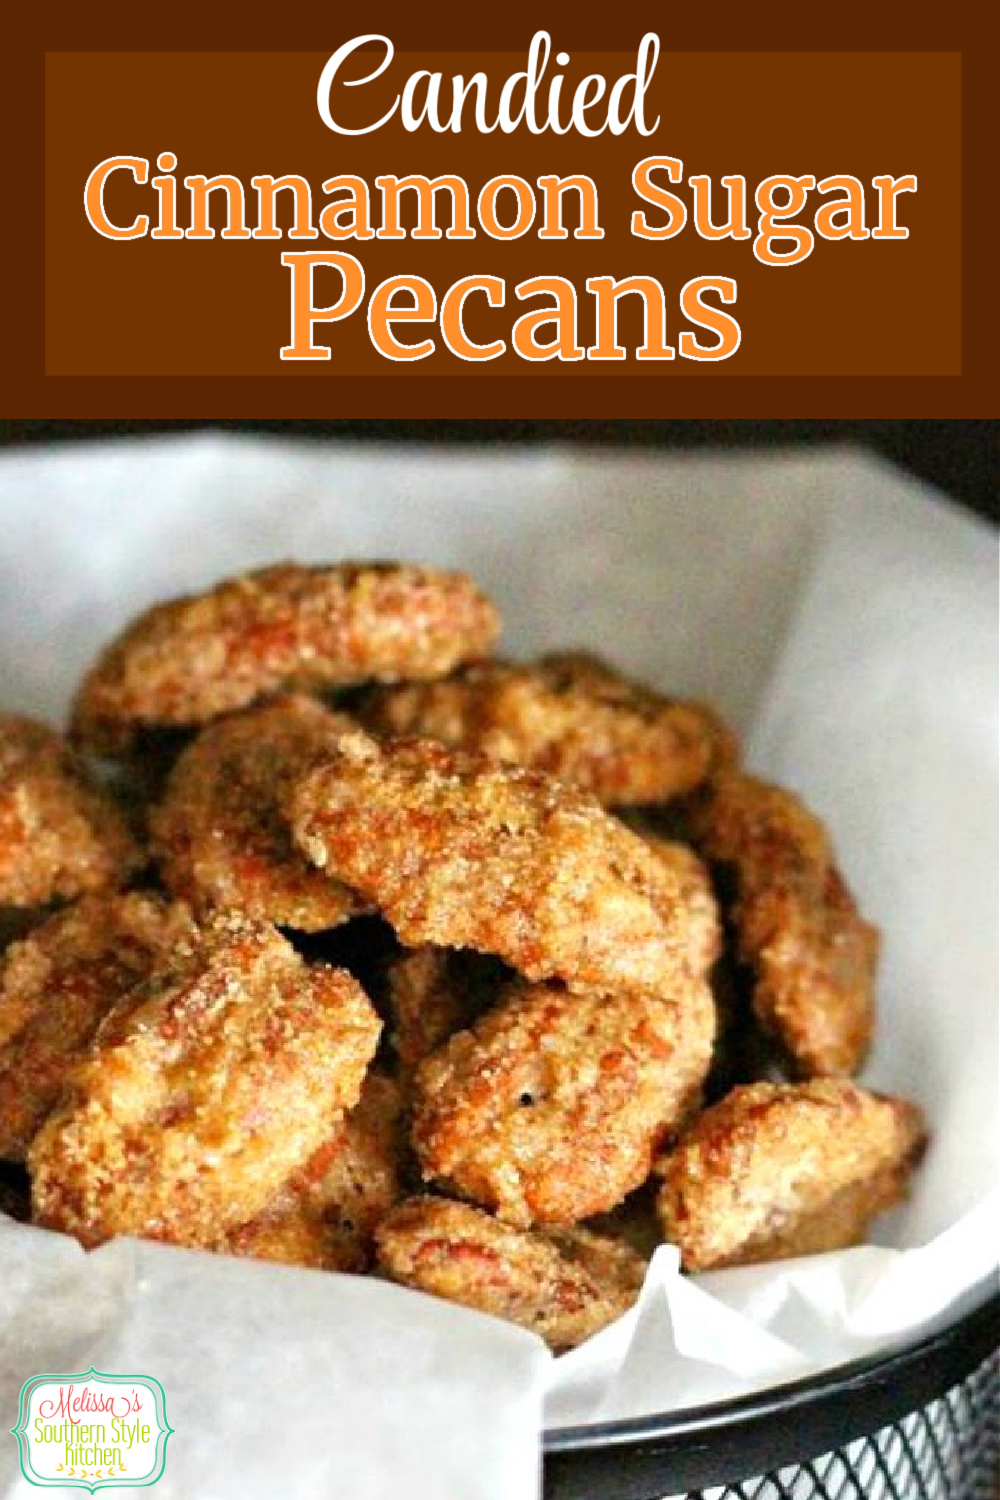 These insanely delicious Candied Cinnamon Sugar Pecans are ideal for holiday snacking and gift giving #pecan #candiedpecan #cinnamonpecans #pralines #southernfood #desserts #holidayrecipes #southernrecipes #christmasrecipes #dessertfoodrecipes